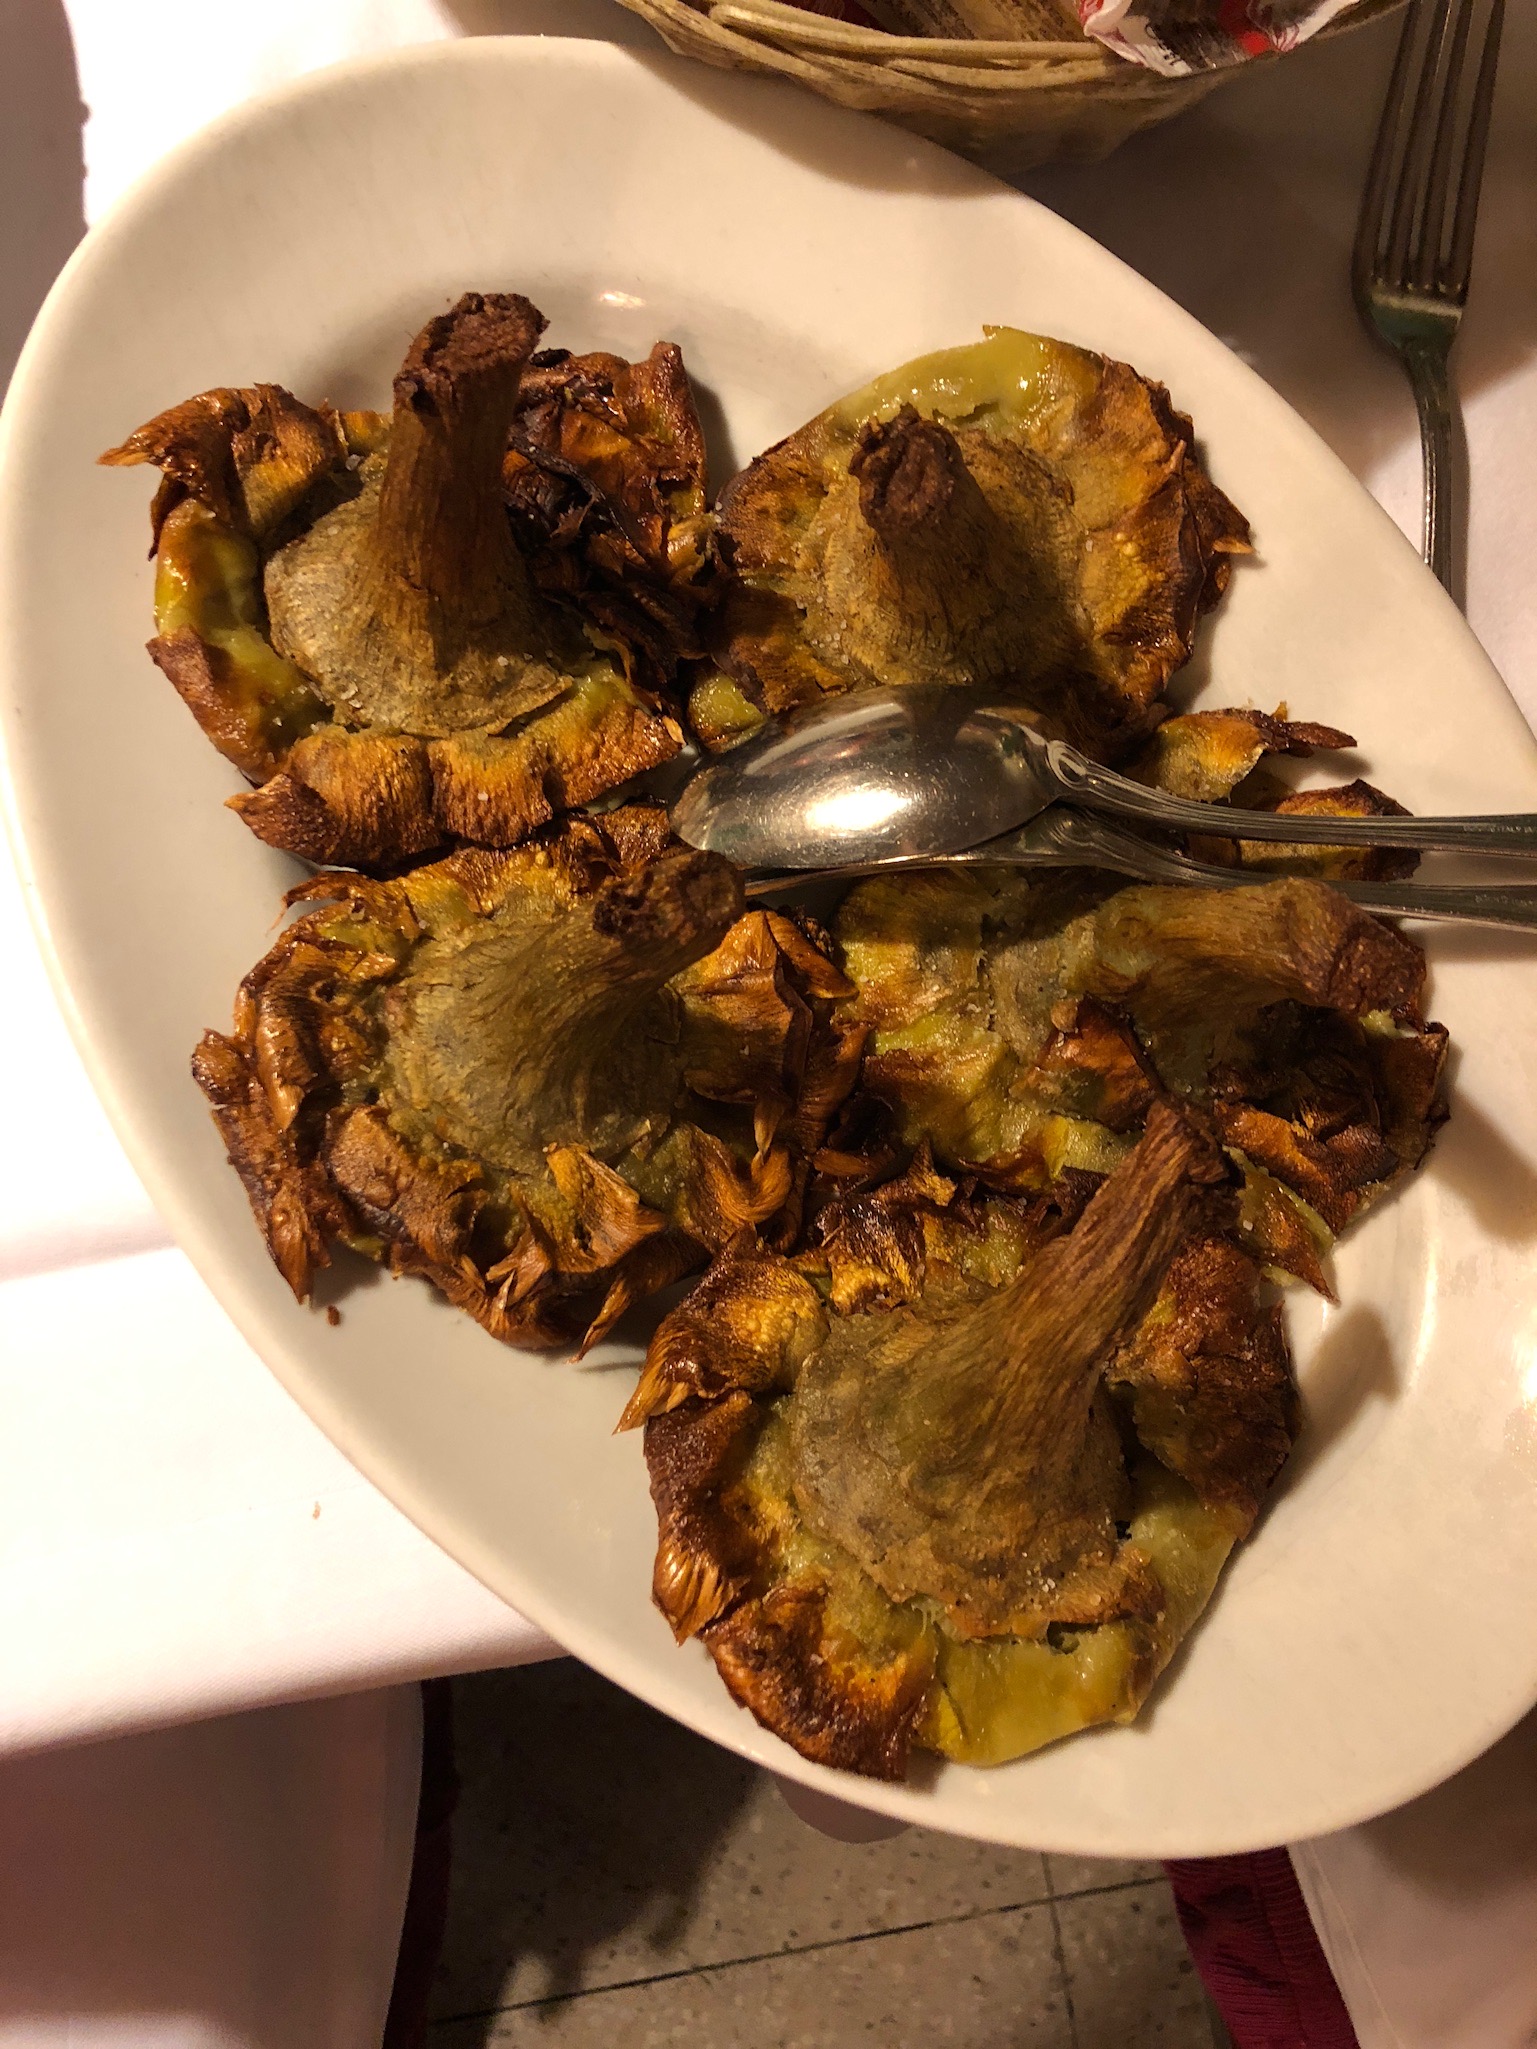 One of the most classic appetizers in Rome that you can find in restaurants or sold by the street vendors is fried artichoke flowers. We were unsure if it was customary to eat the entire thing, stems and all. But we had no problem eating it! So delicious and also not a common way to cook artichokes in U.S. establishments.